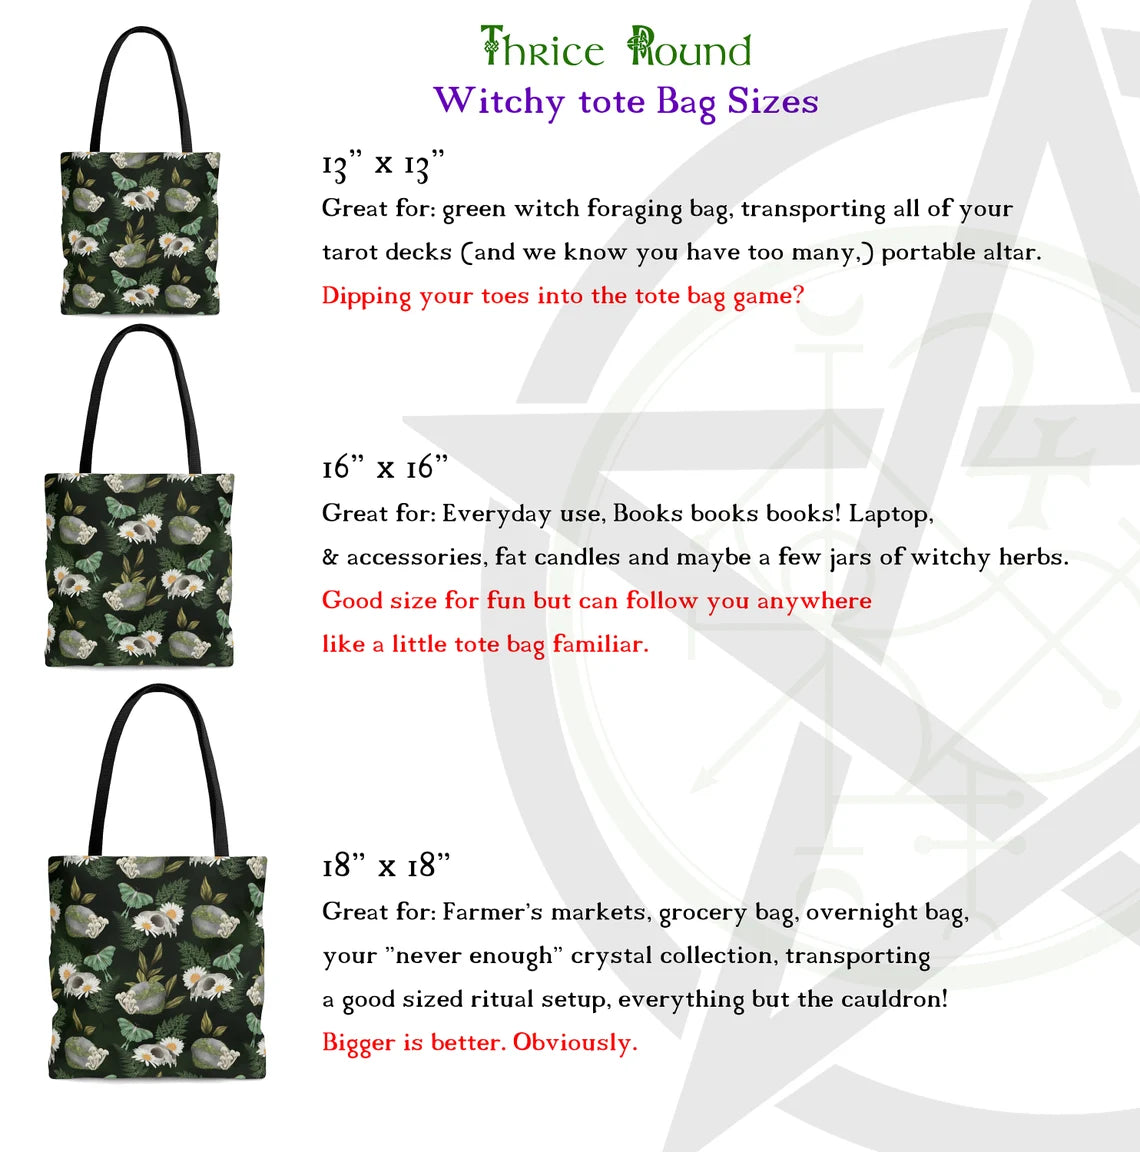 Yellow WITCH Tote - Knowledge